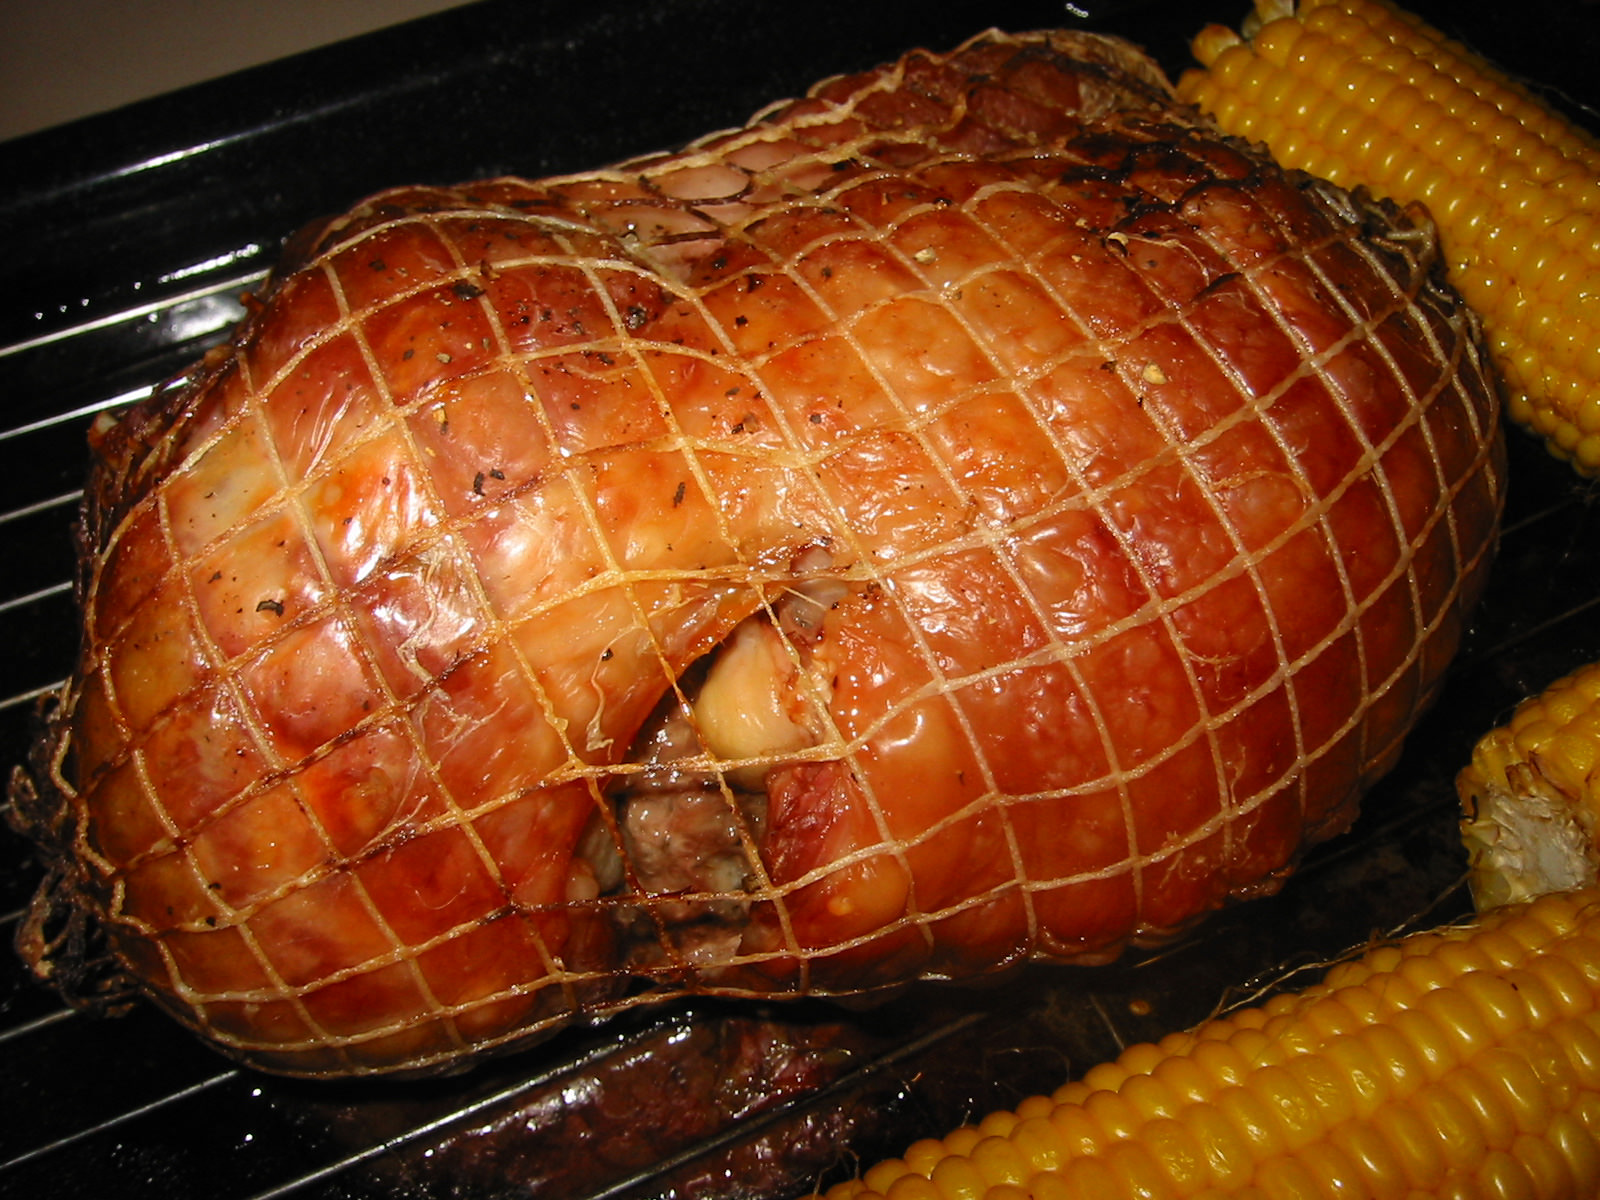 Turkey thigh roast, flanked by roasted corn on the cob